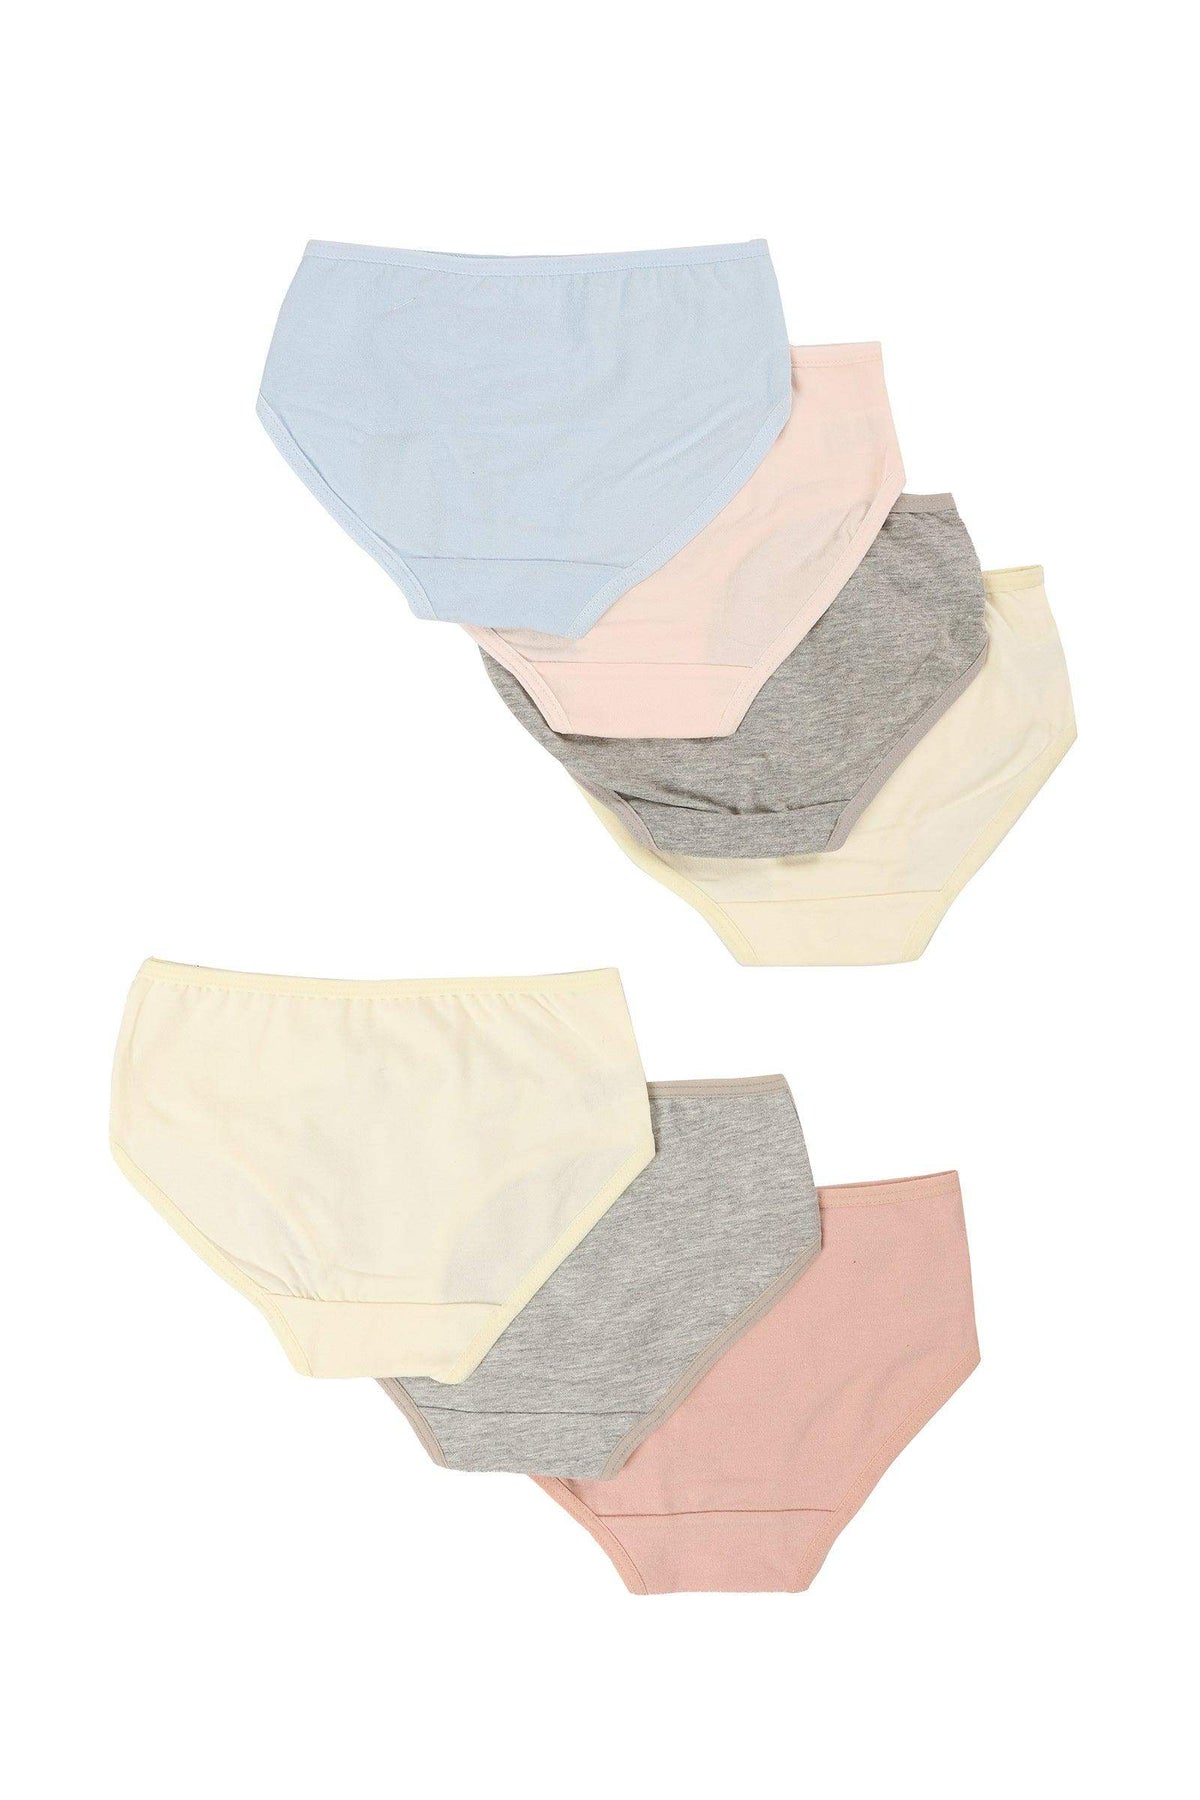 Pack of 7 Brief Panties for Girls - Carina - كارينا